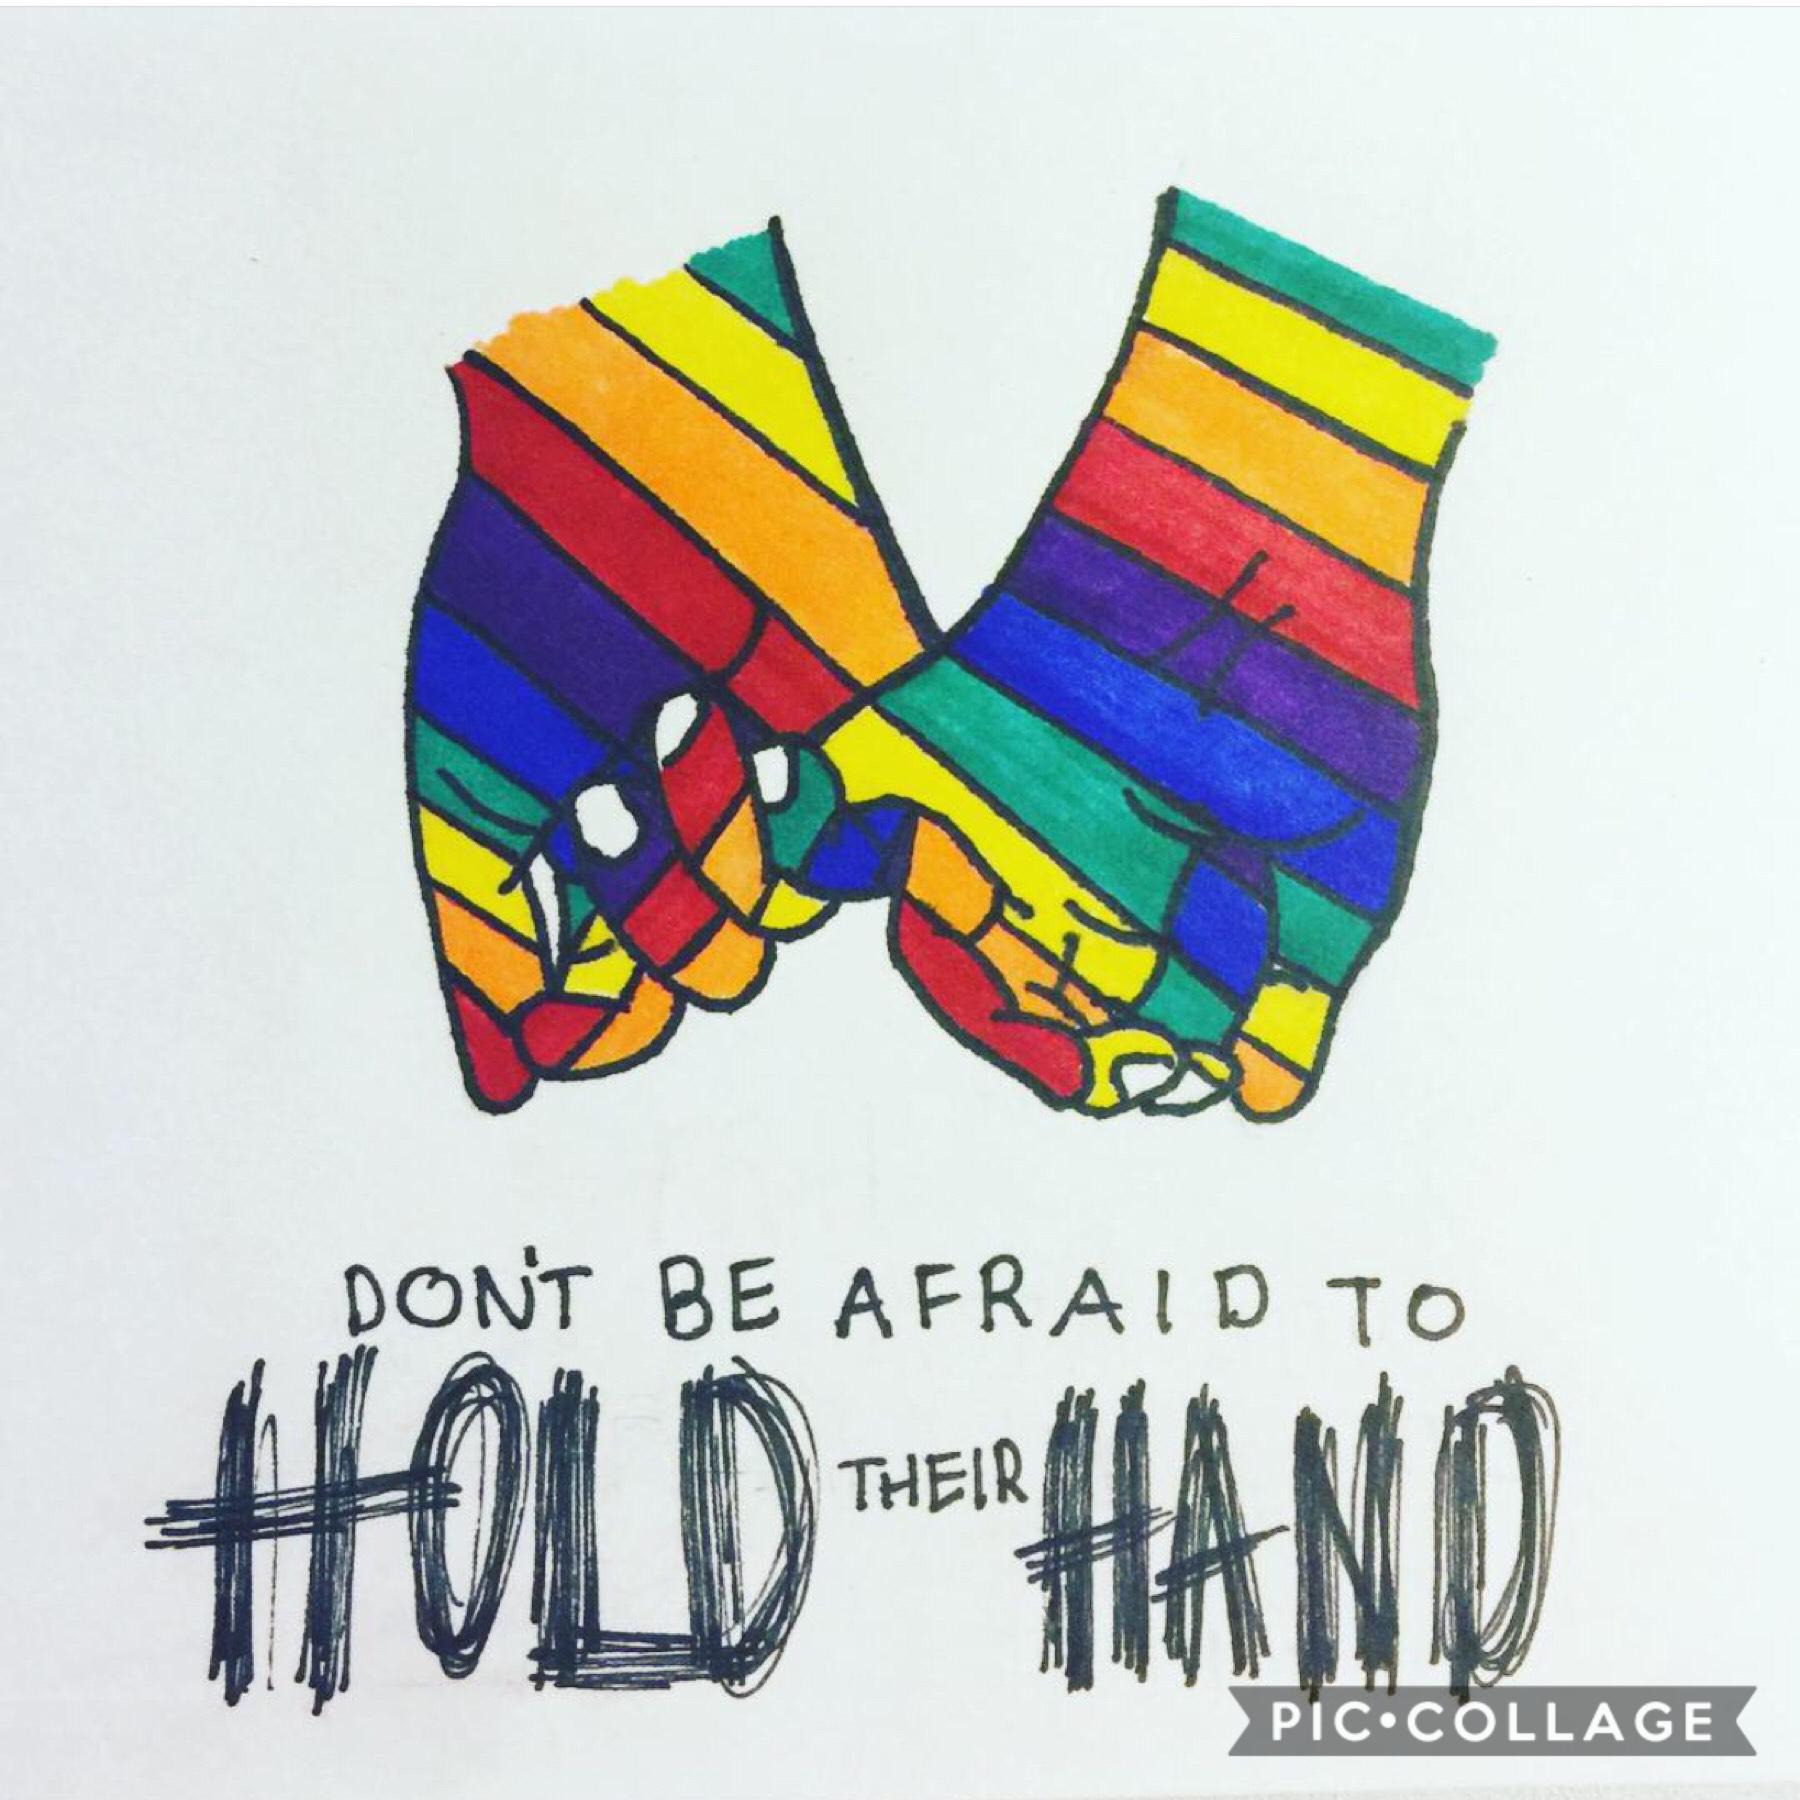 “•tap•”
I traced the hand outline BUT I DID THE COLORING😂 So just letting you guys know. I also messed up on the right hand but I like the message :) Sending all my love~~💗🏳️‍🌈